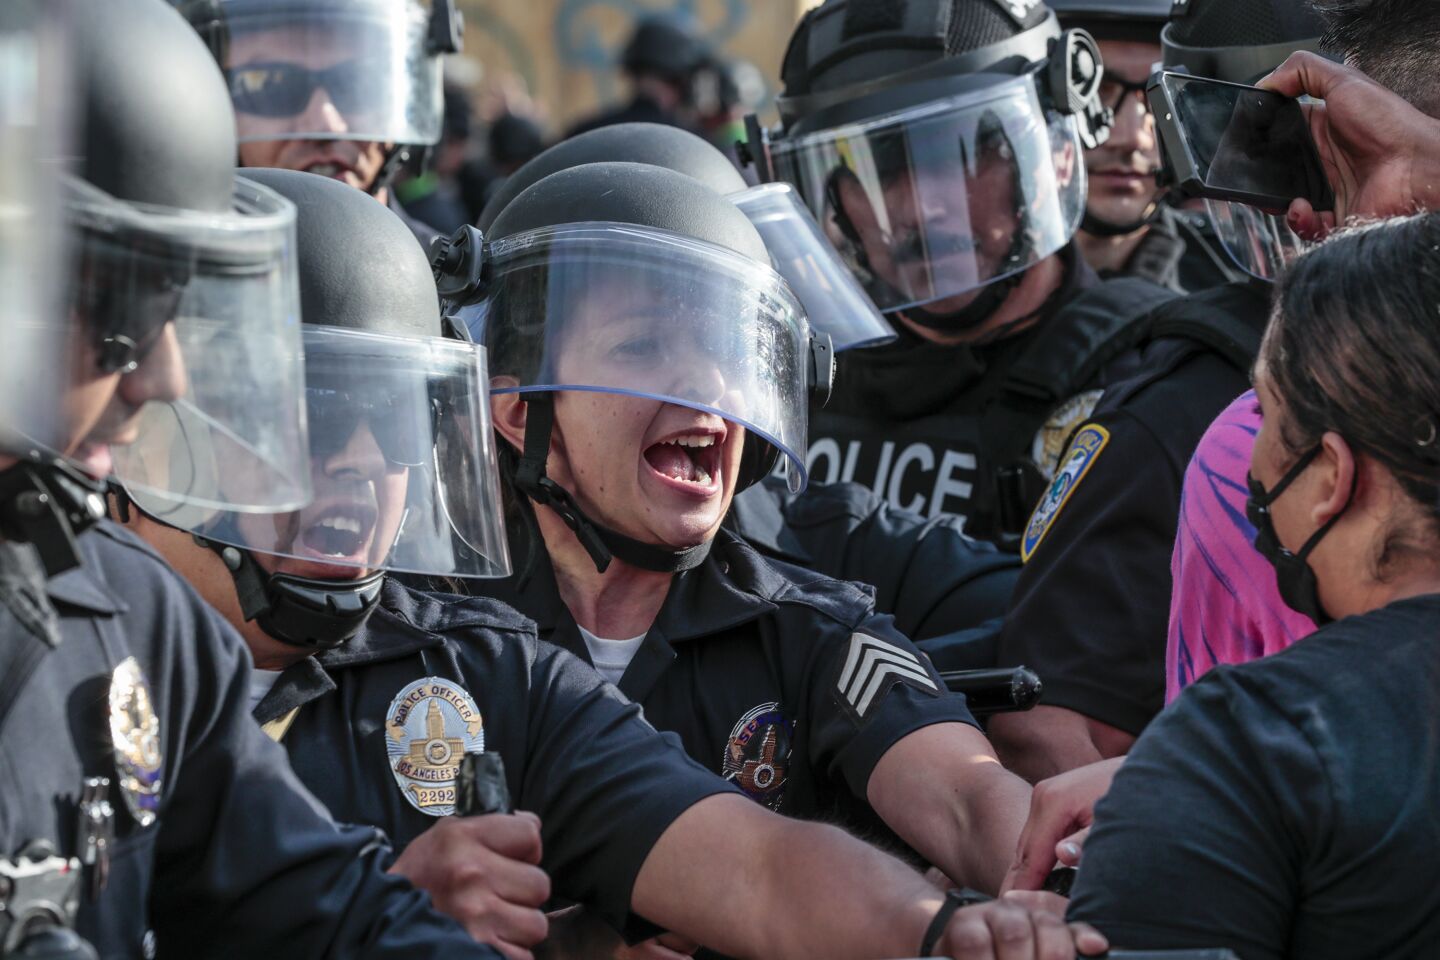 Police and protesters face off in Santa Monica on Sunday.